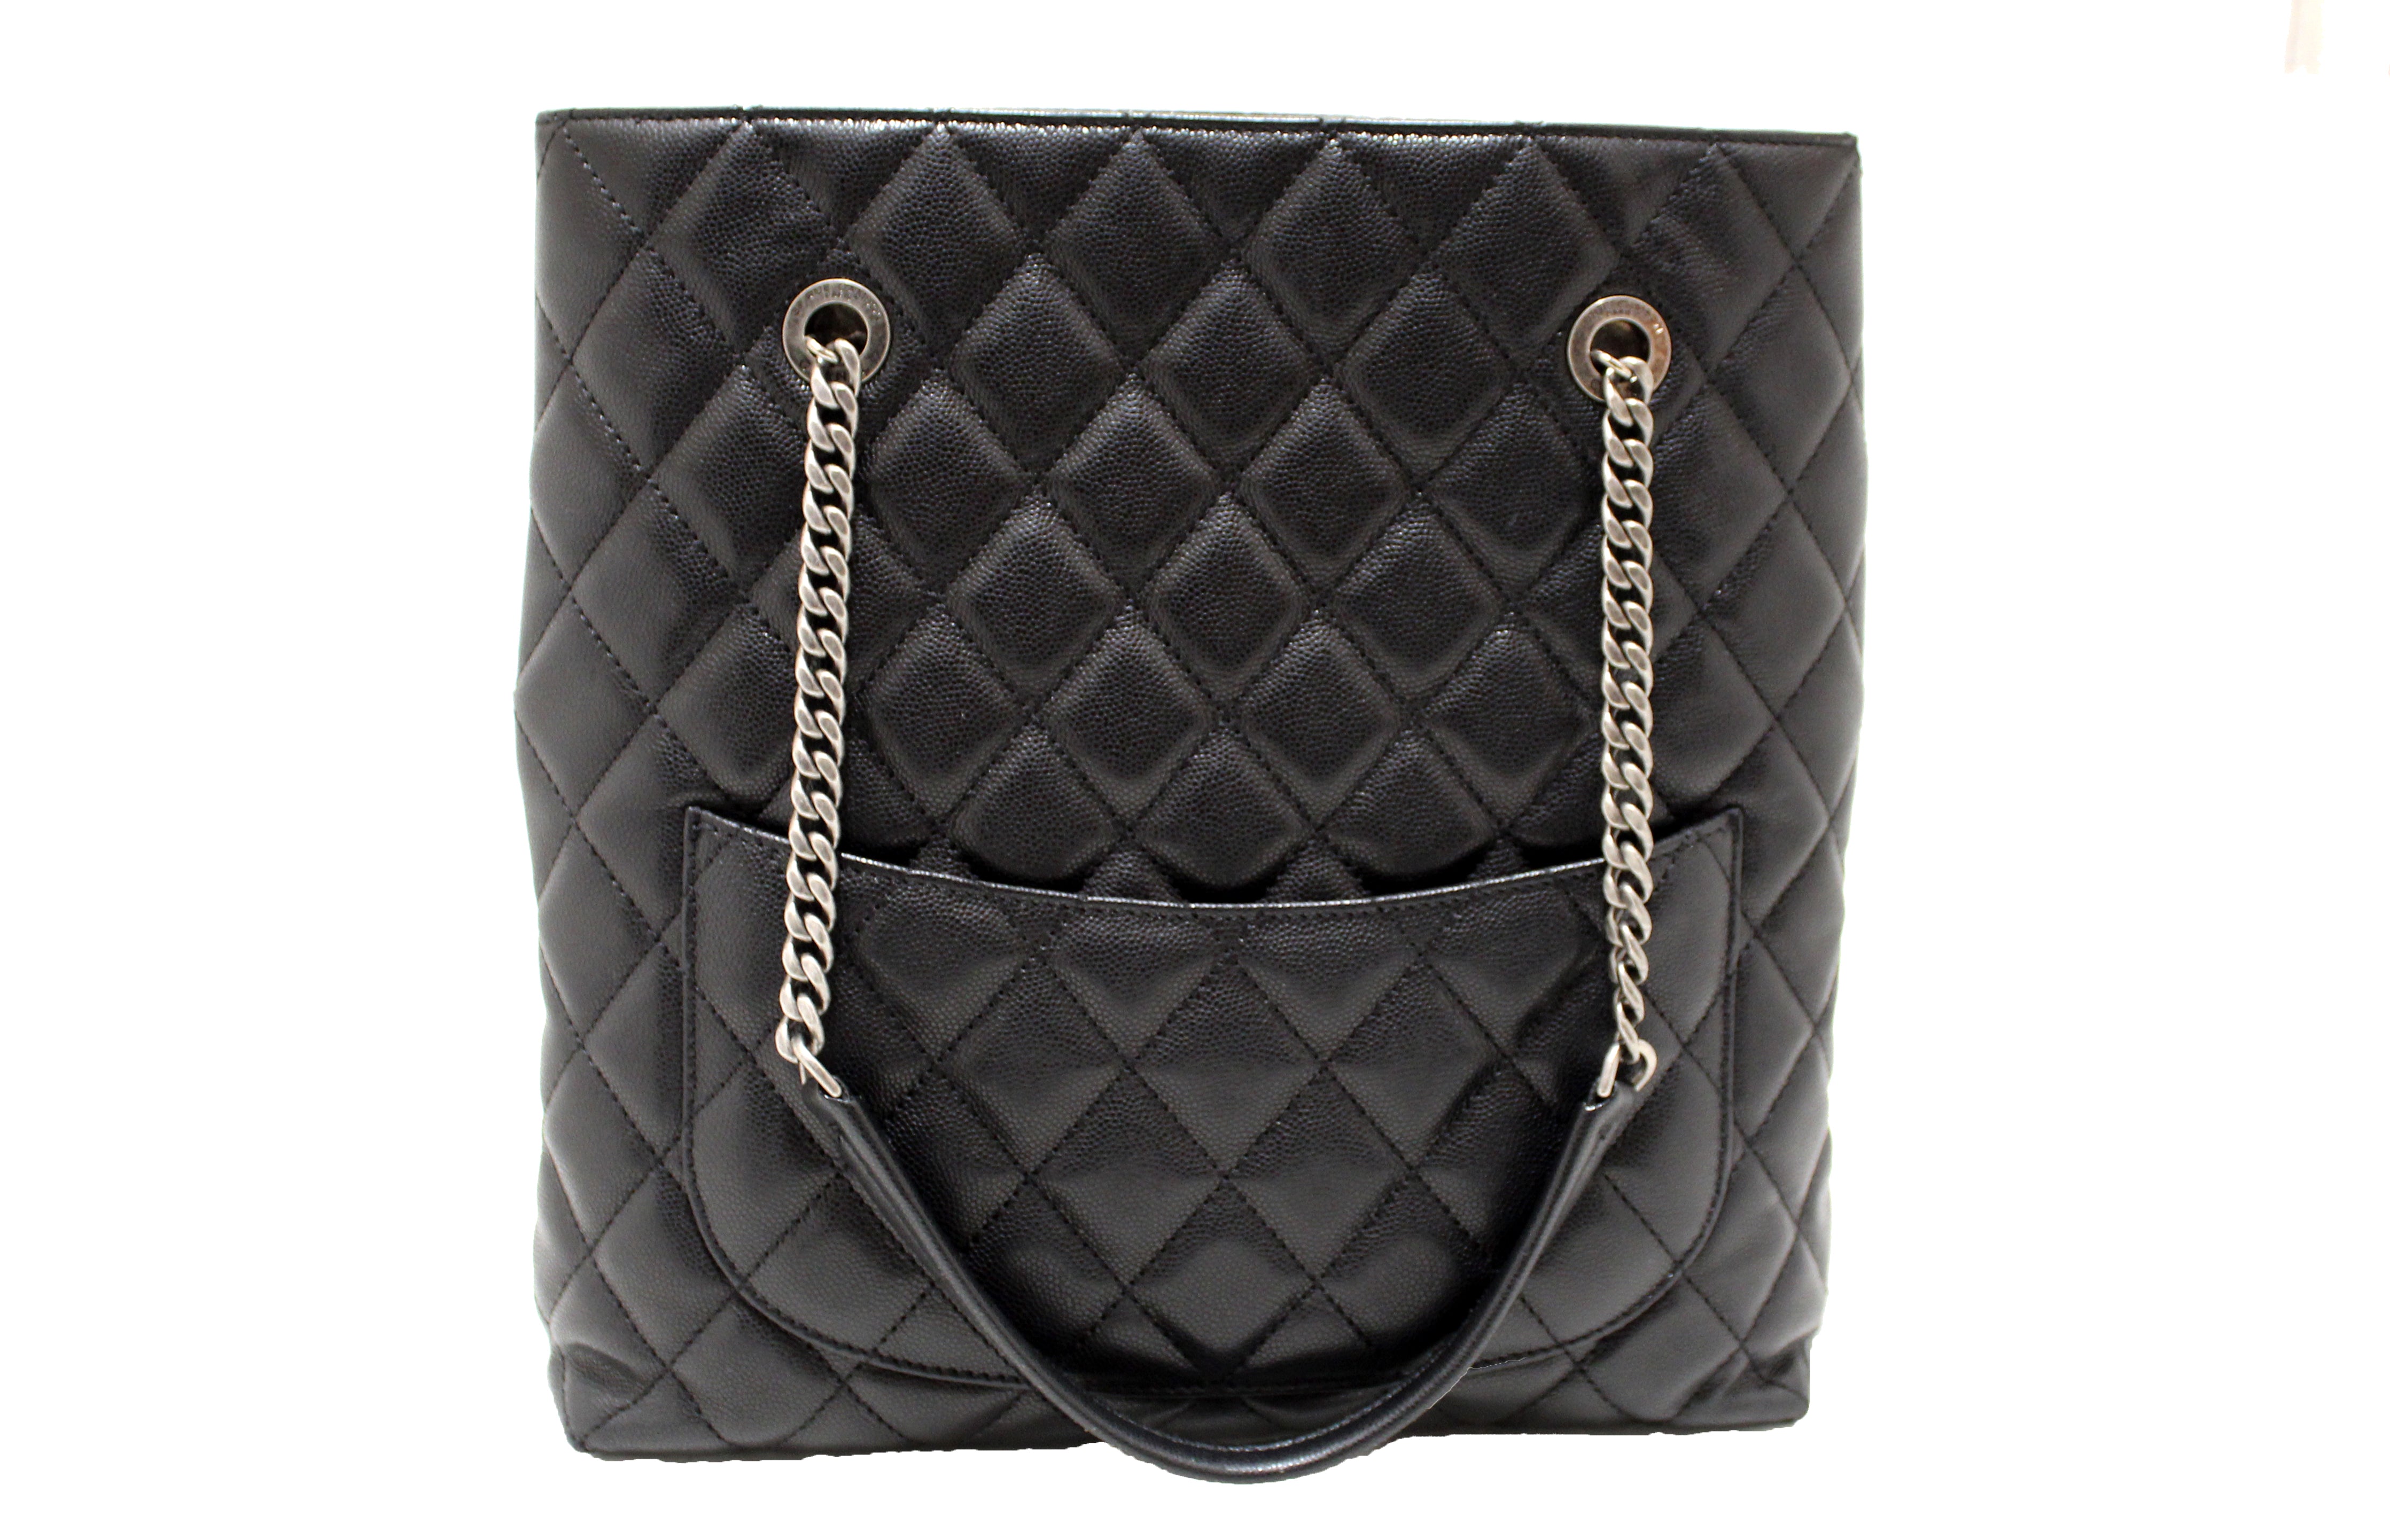 Authentic Chanel Black Quilted Caviar Leather Shoulder Tote